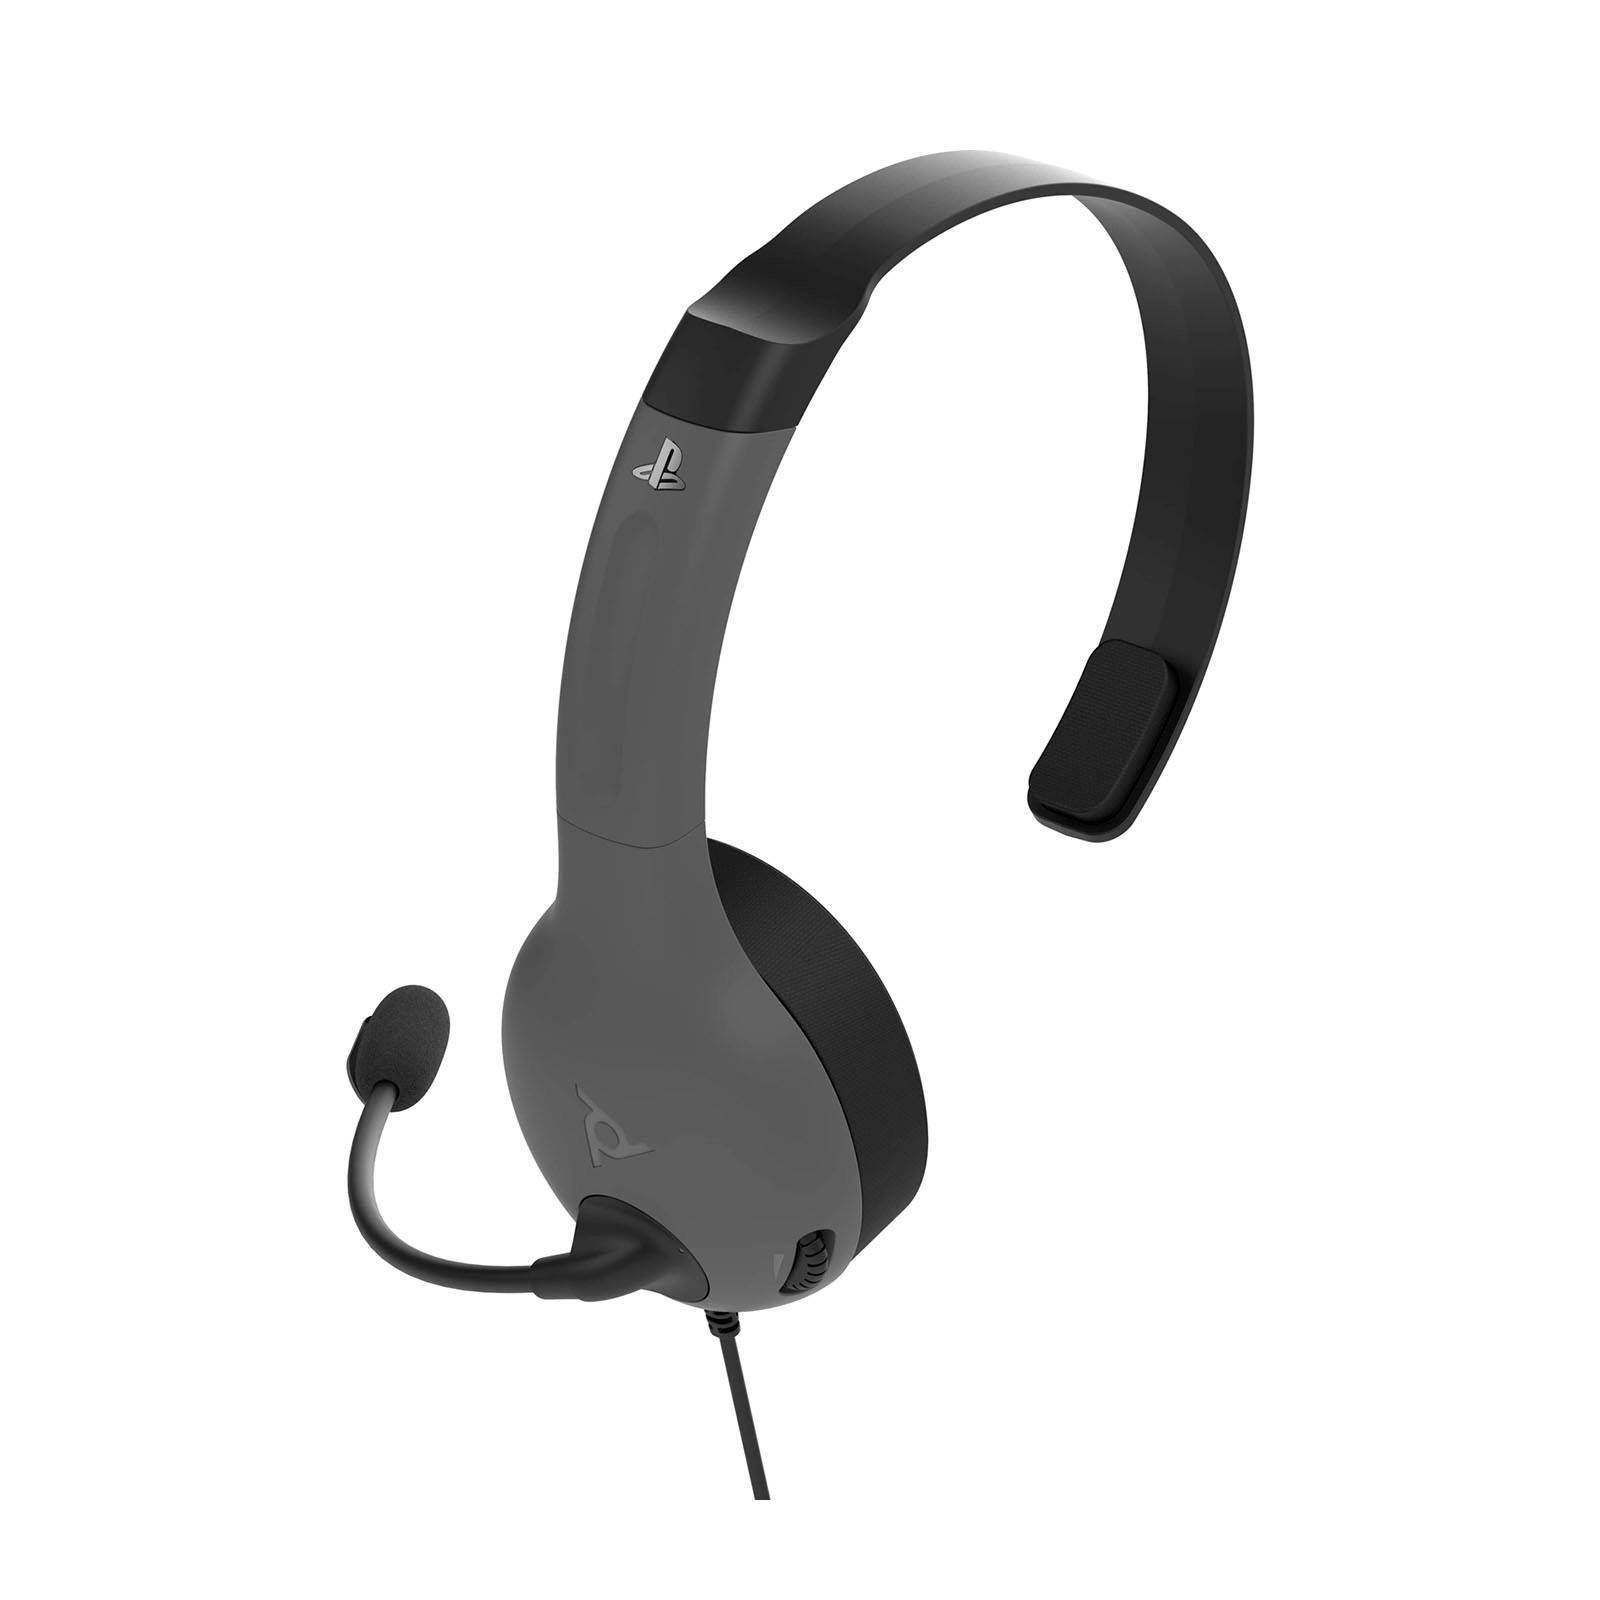 lvl30 chat headset for ps4